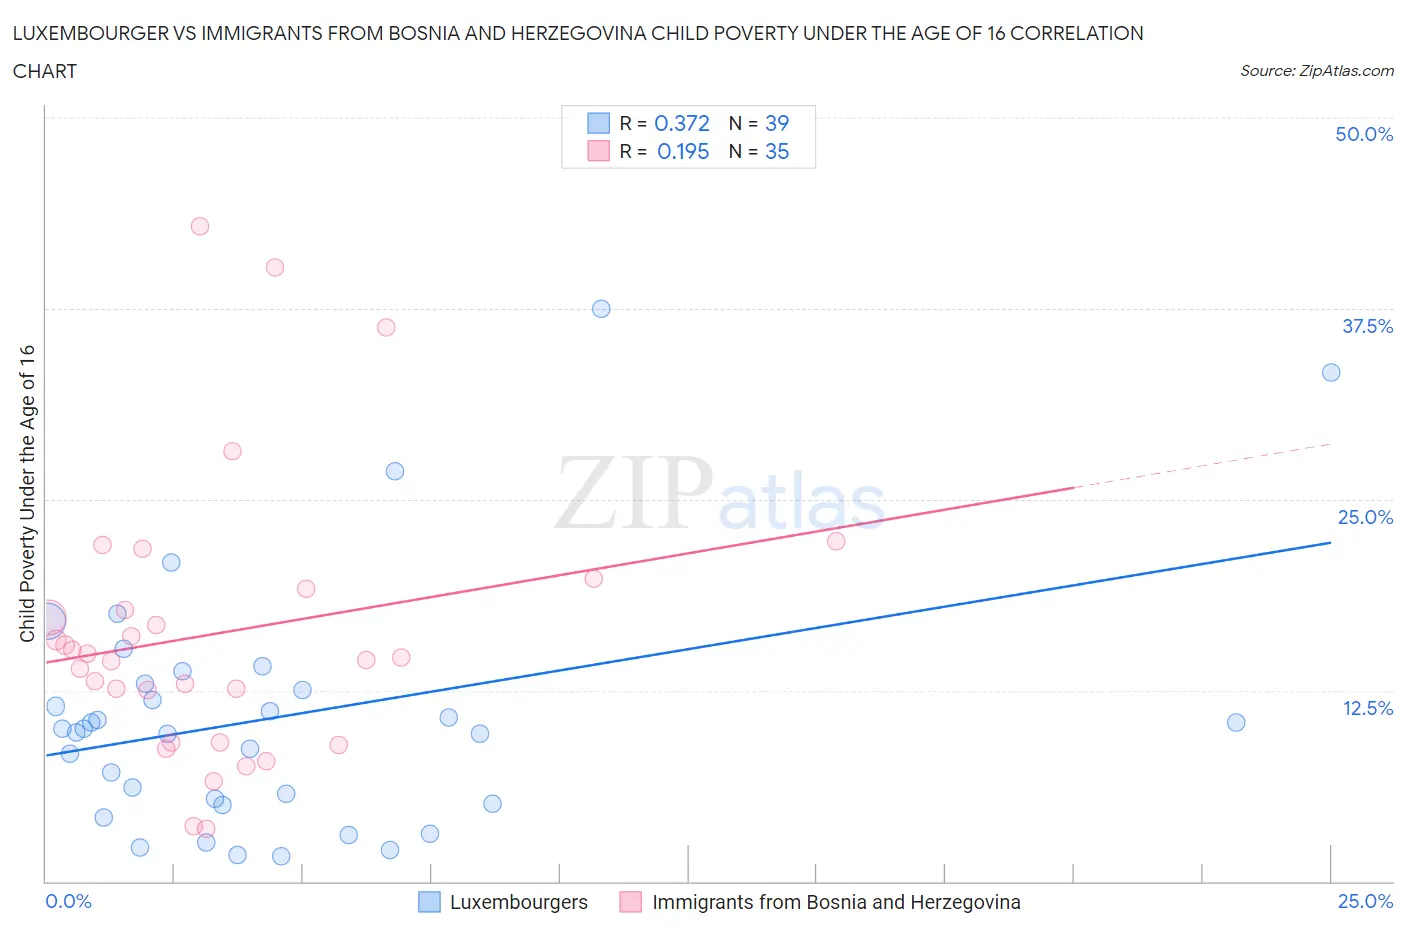 Luxembourger vs Immigrants from Bosnia and Herzegovina Child Poverty Under the Age of 16